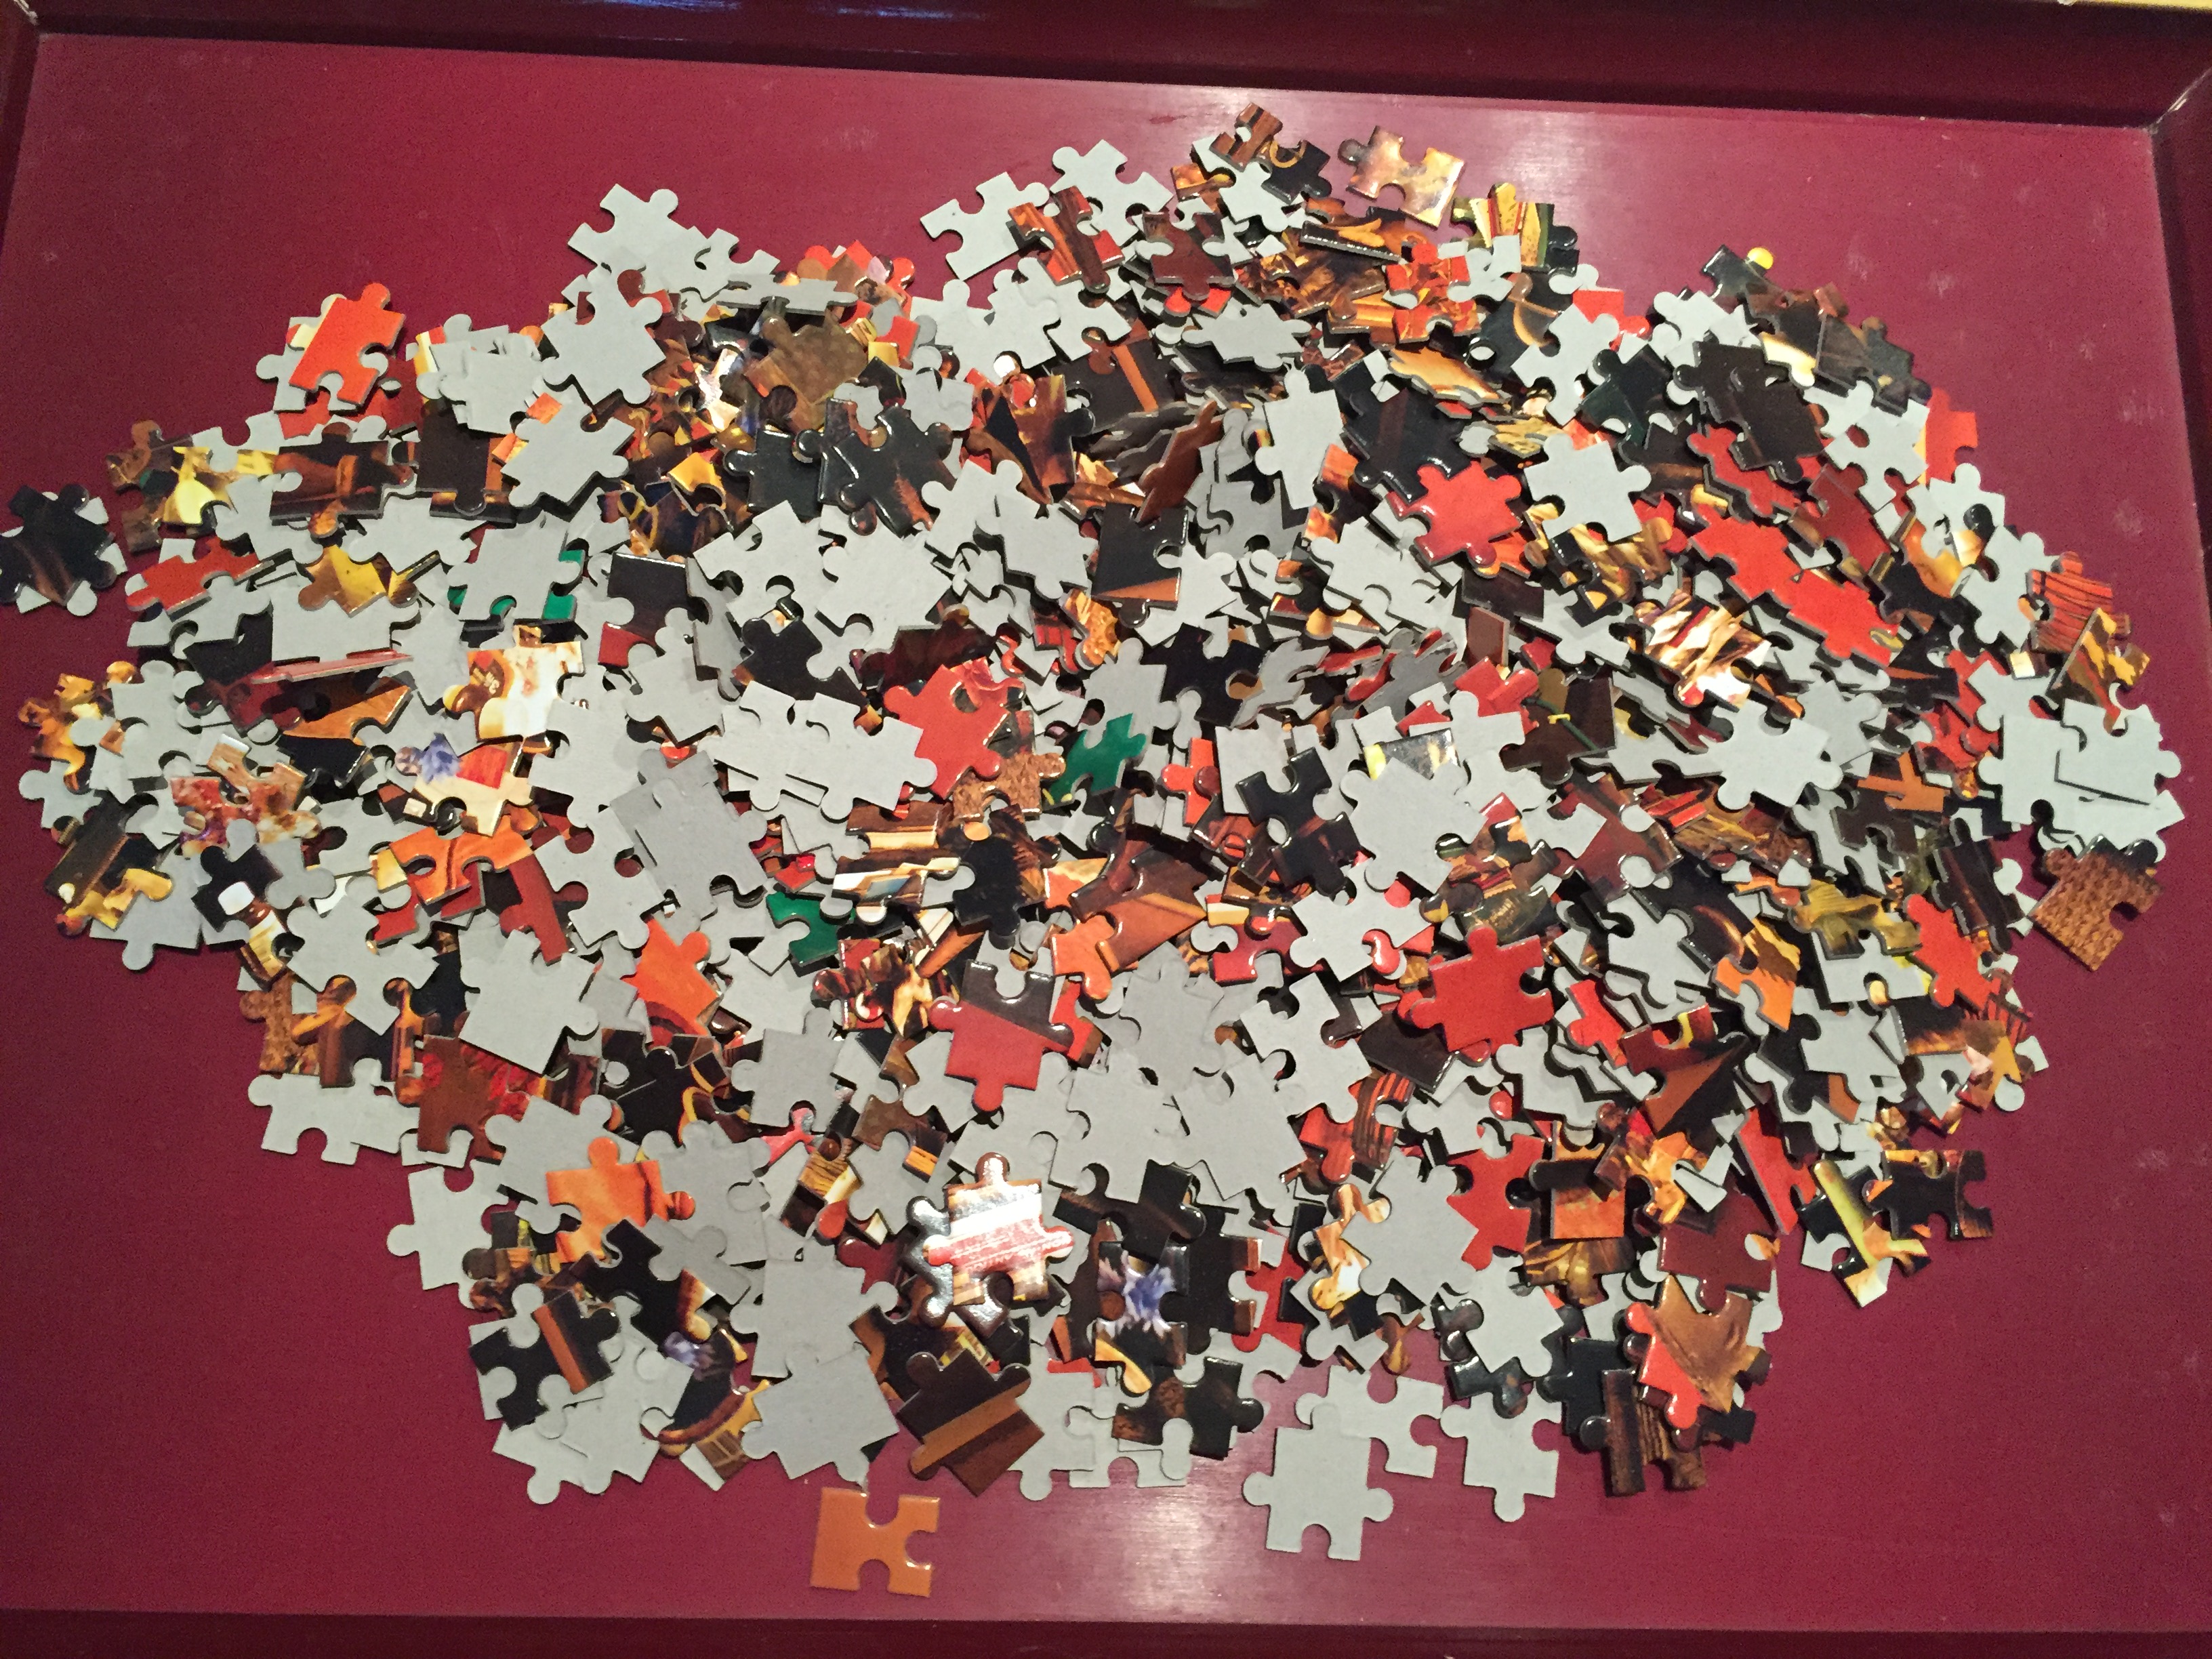 My new puzzle - A work in progress!